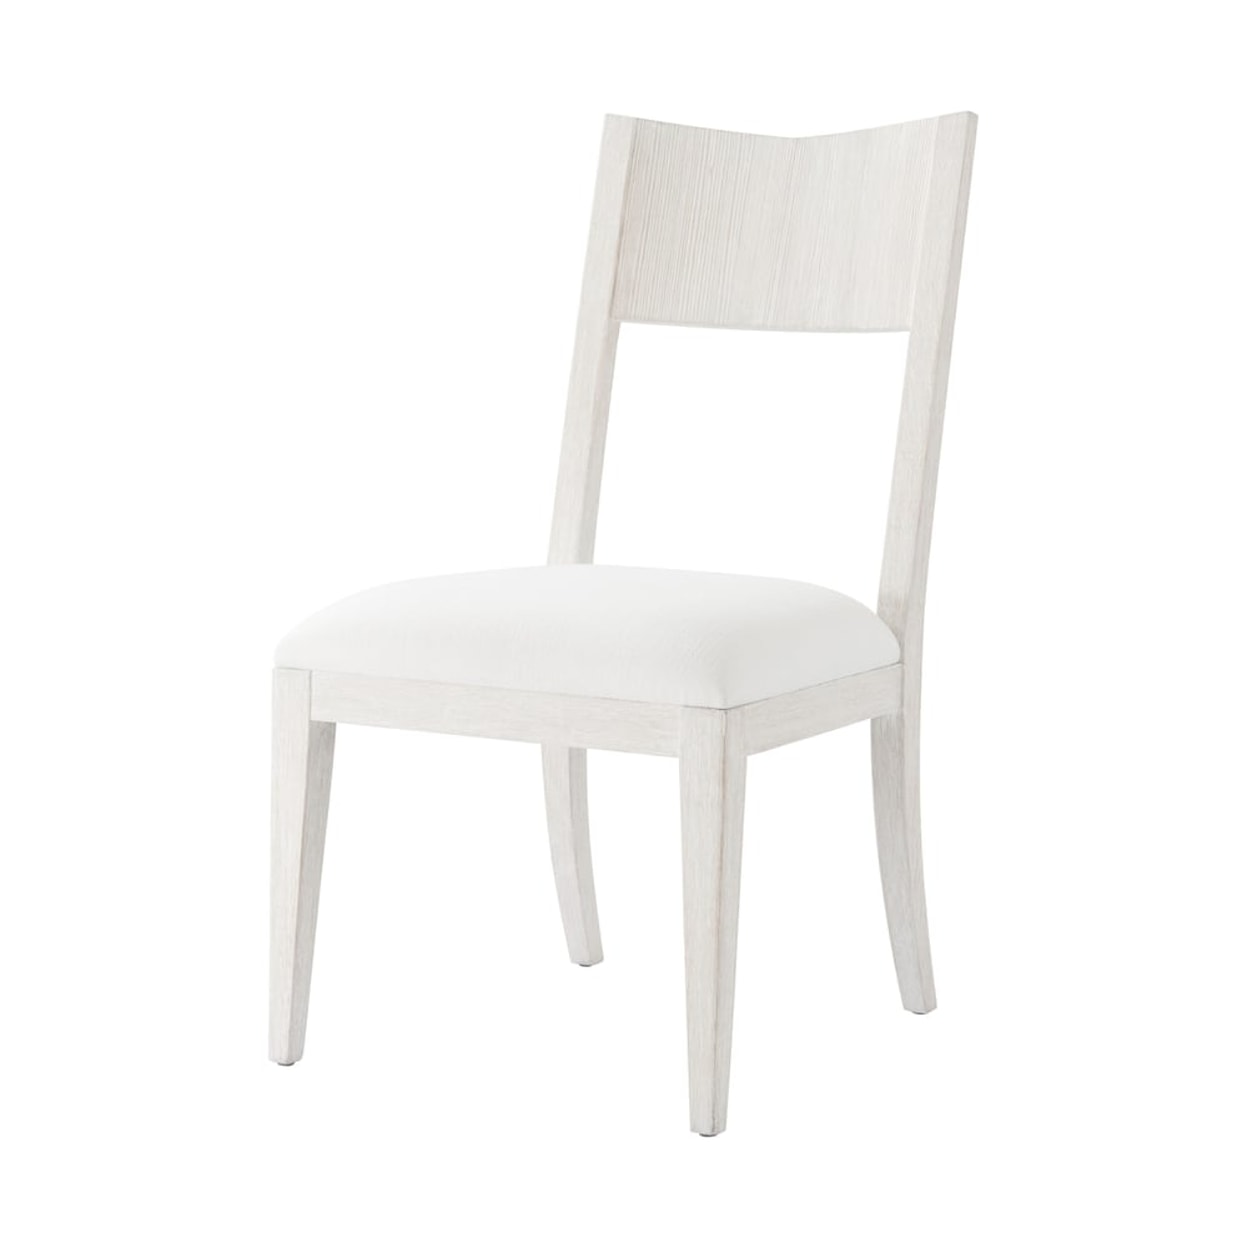 Theodore Alexander Breeze Side Chair with Upholstered Cushion